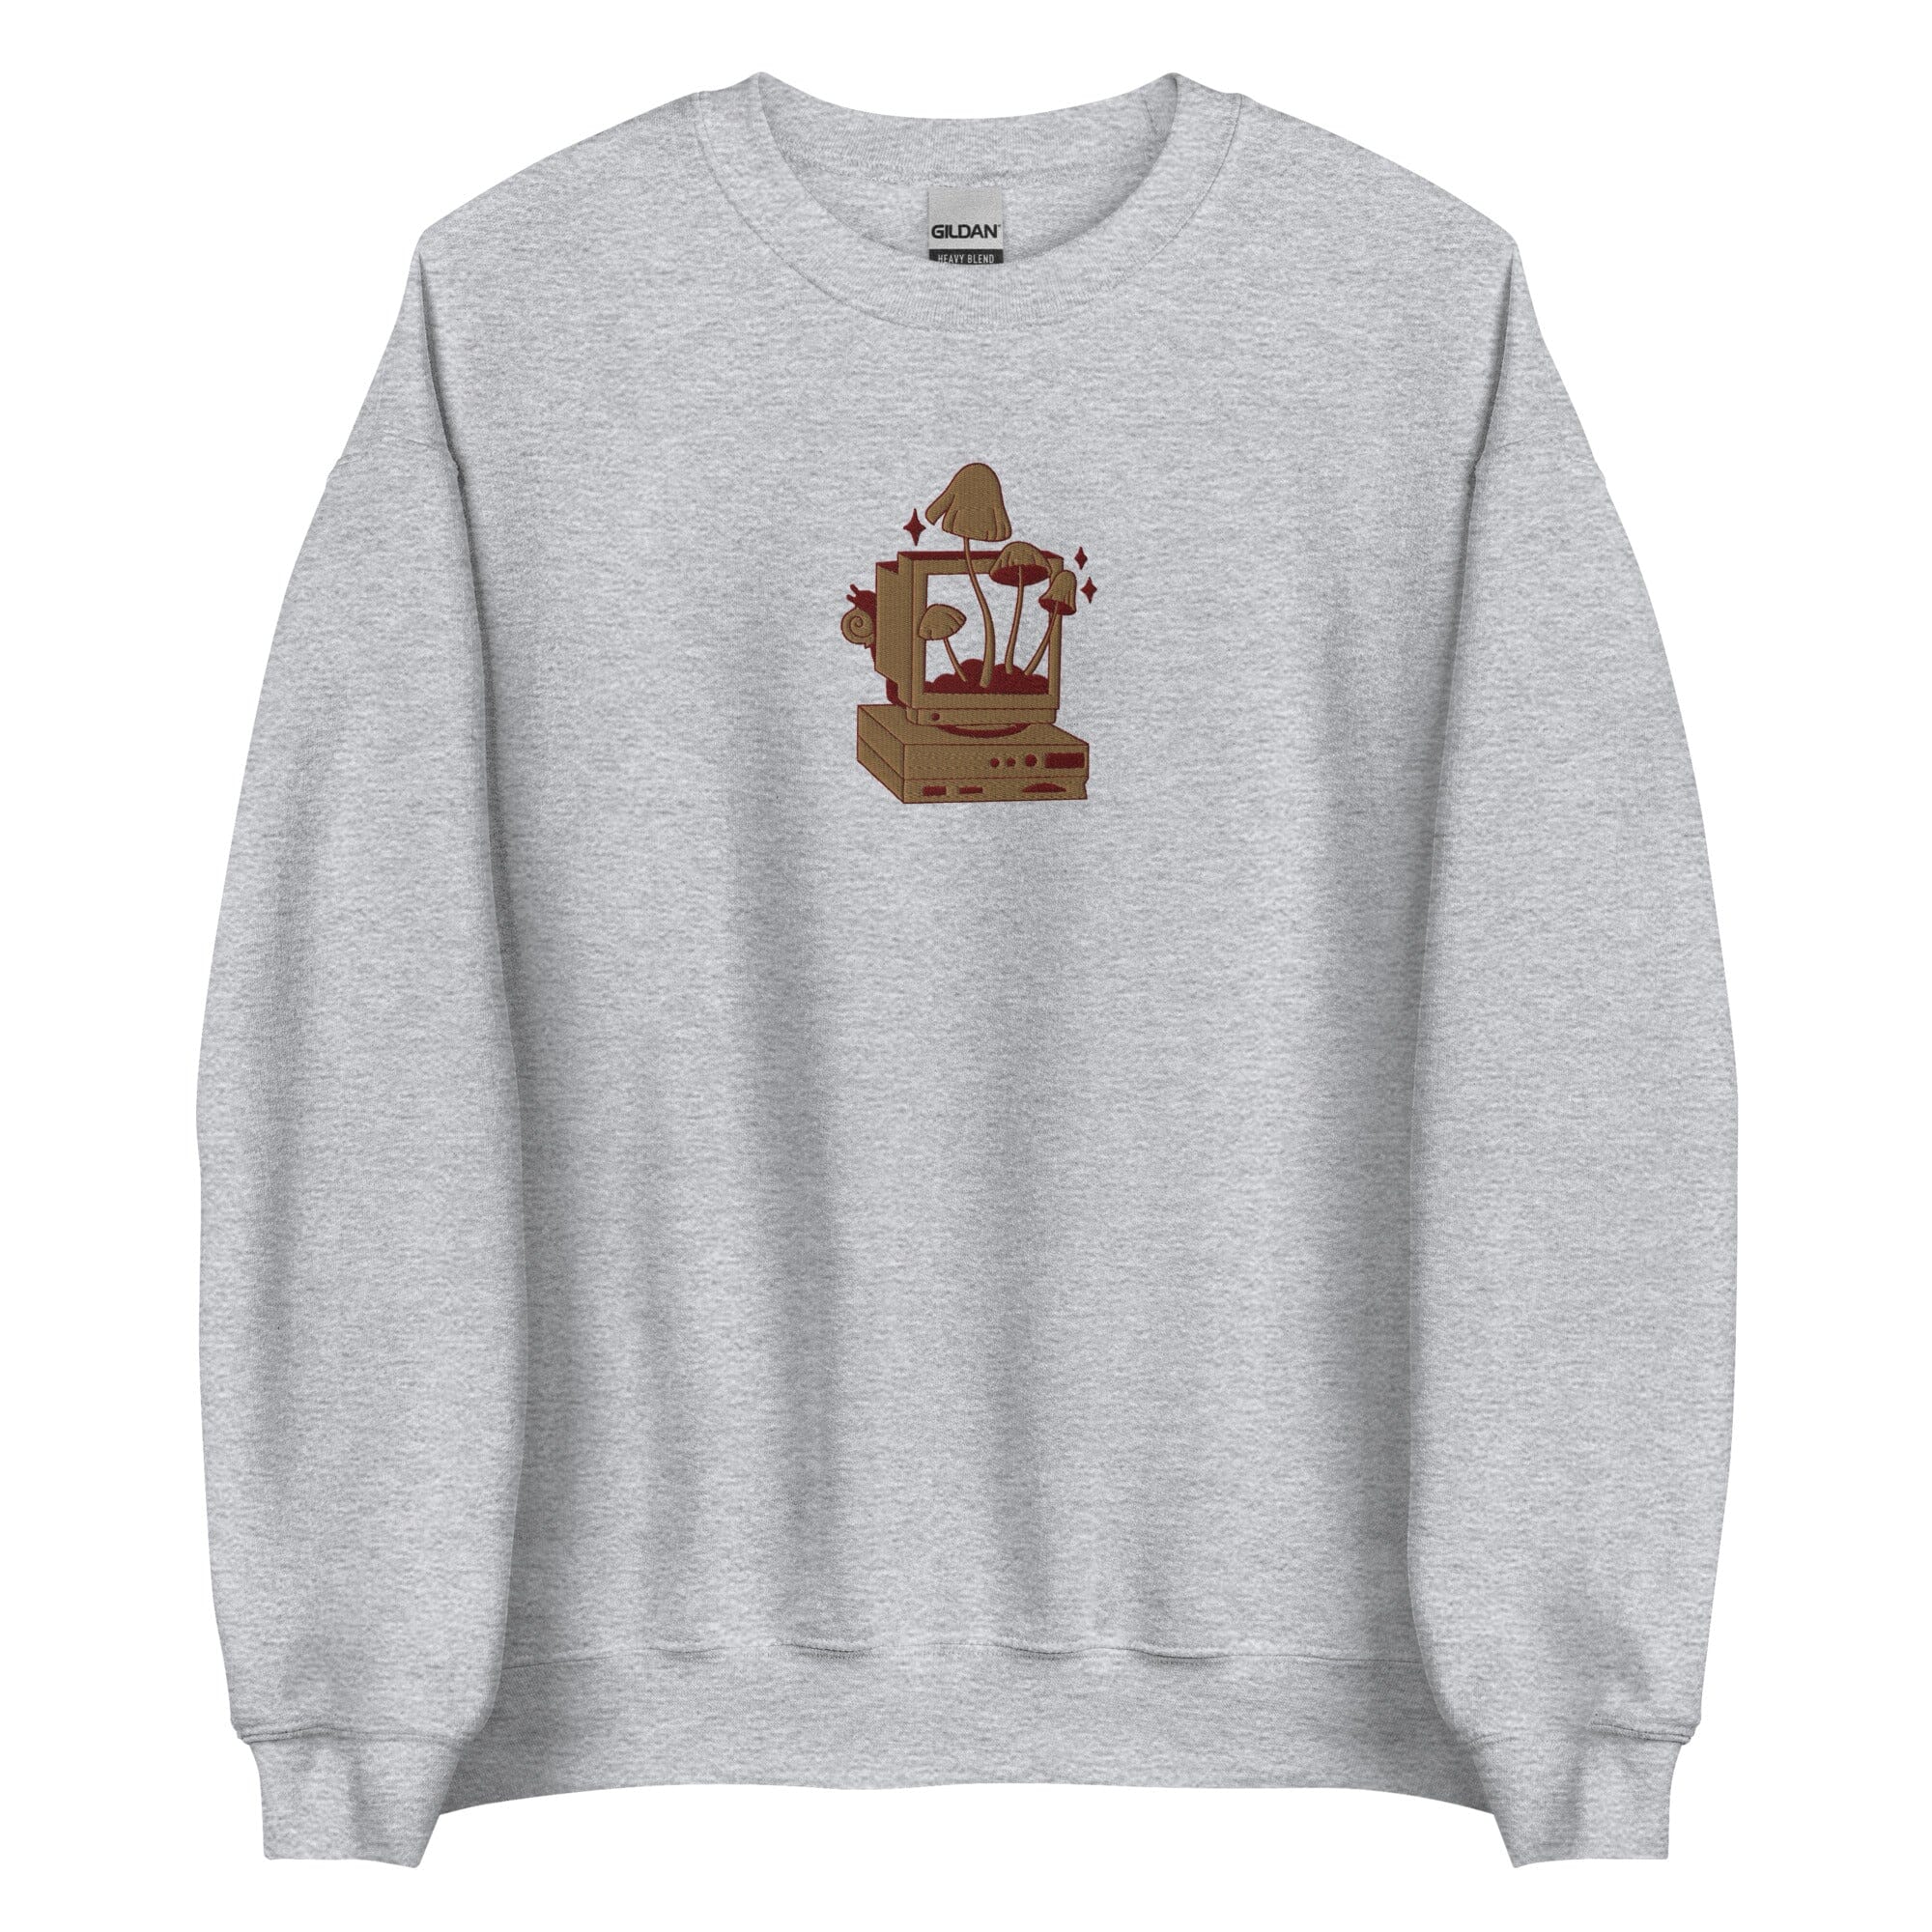 Cozy PC Gaming | Embroidered Unisex Sweatshirt | Cozy Gamer Threads & Thistles Inventory Sport Grey S 